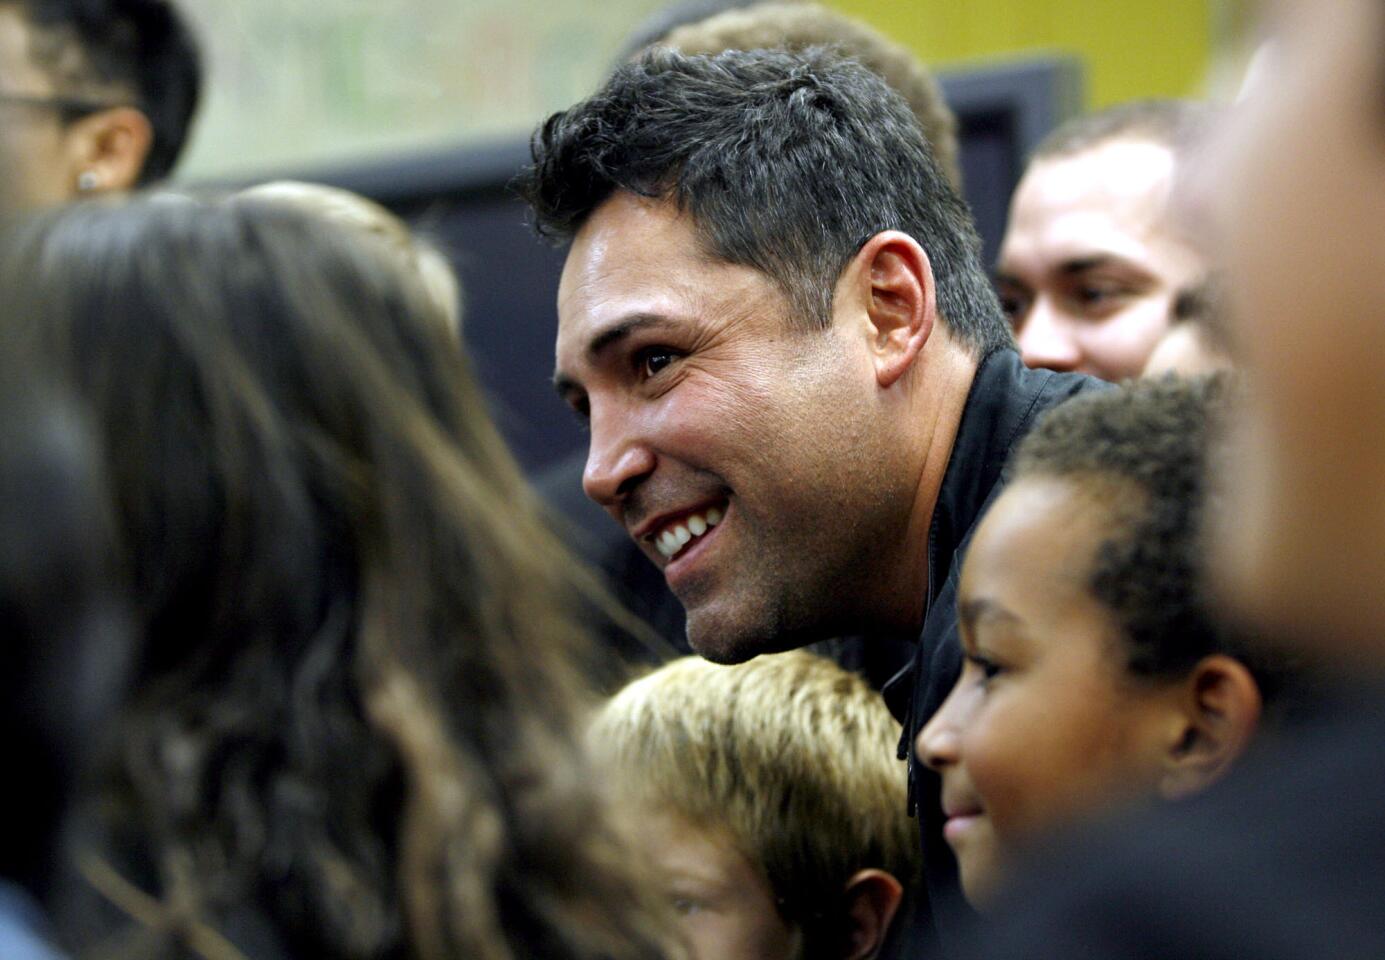 Ten-time World Champion boxer Oscar de la Hoya poses with children for a photo at the Boys and Girls Club of Burbank and Greater East Valley for an AT&T press conference.